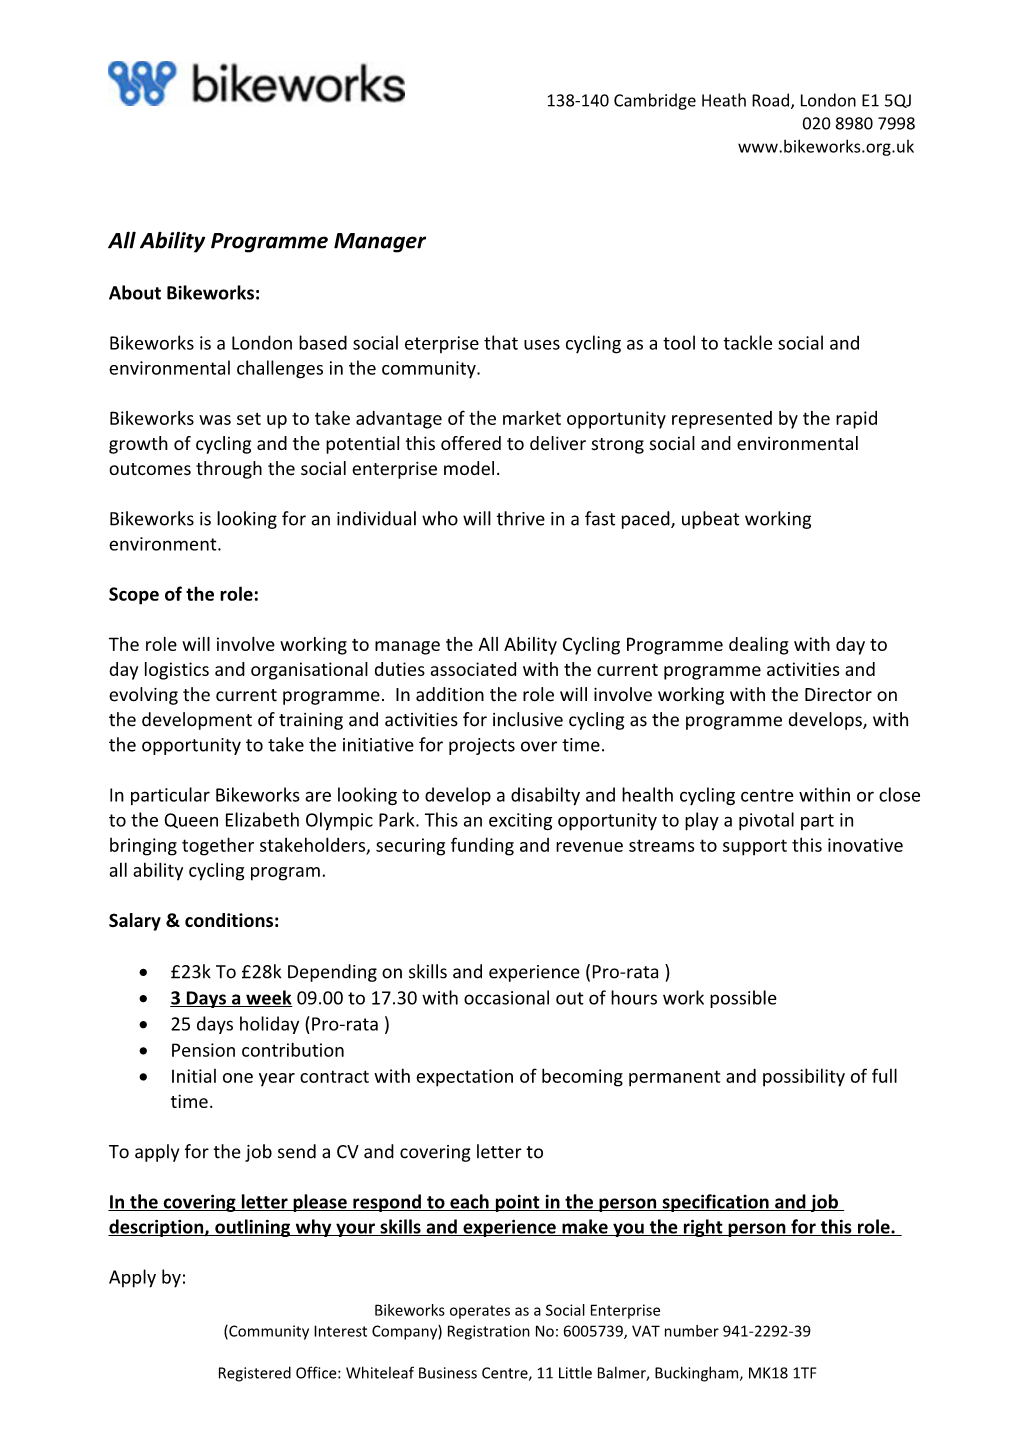 All Ability Programme Manager